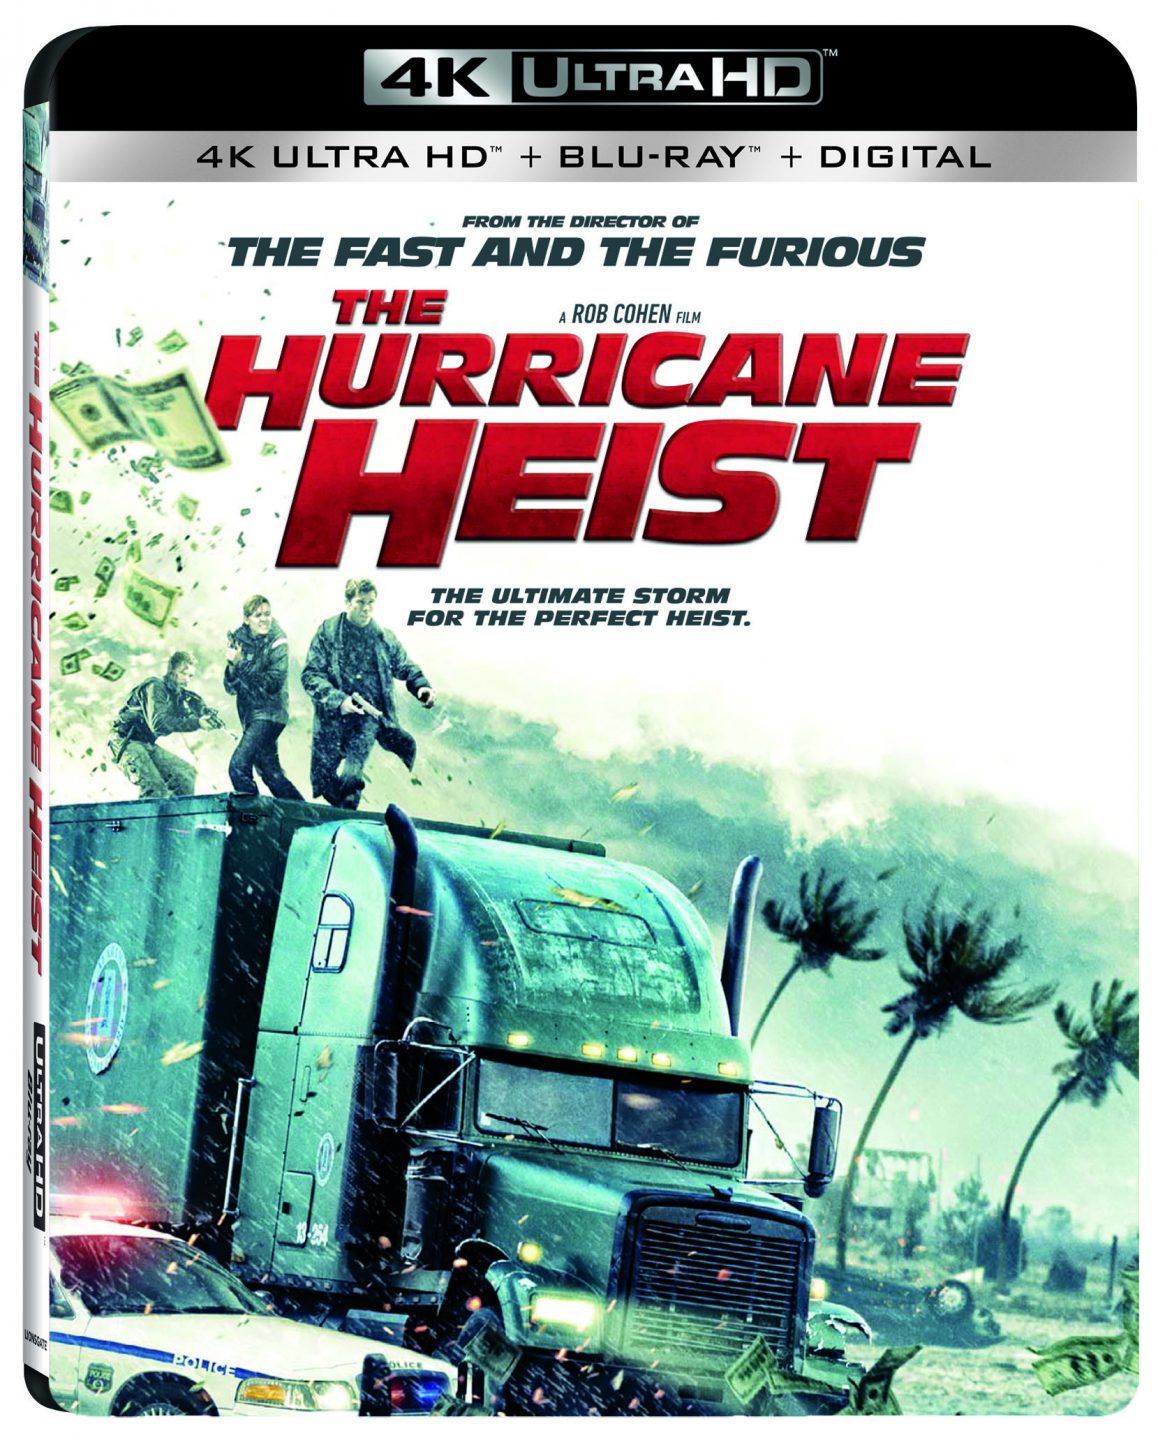 The Hurricane Heist 4K Ultra HD Combo cover (Lionsgate Home Entertainment)